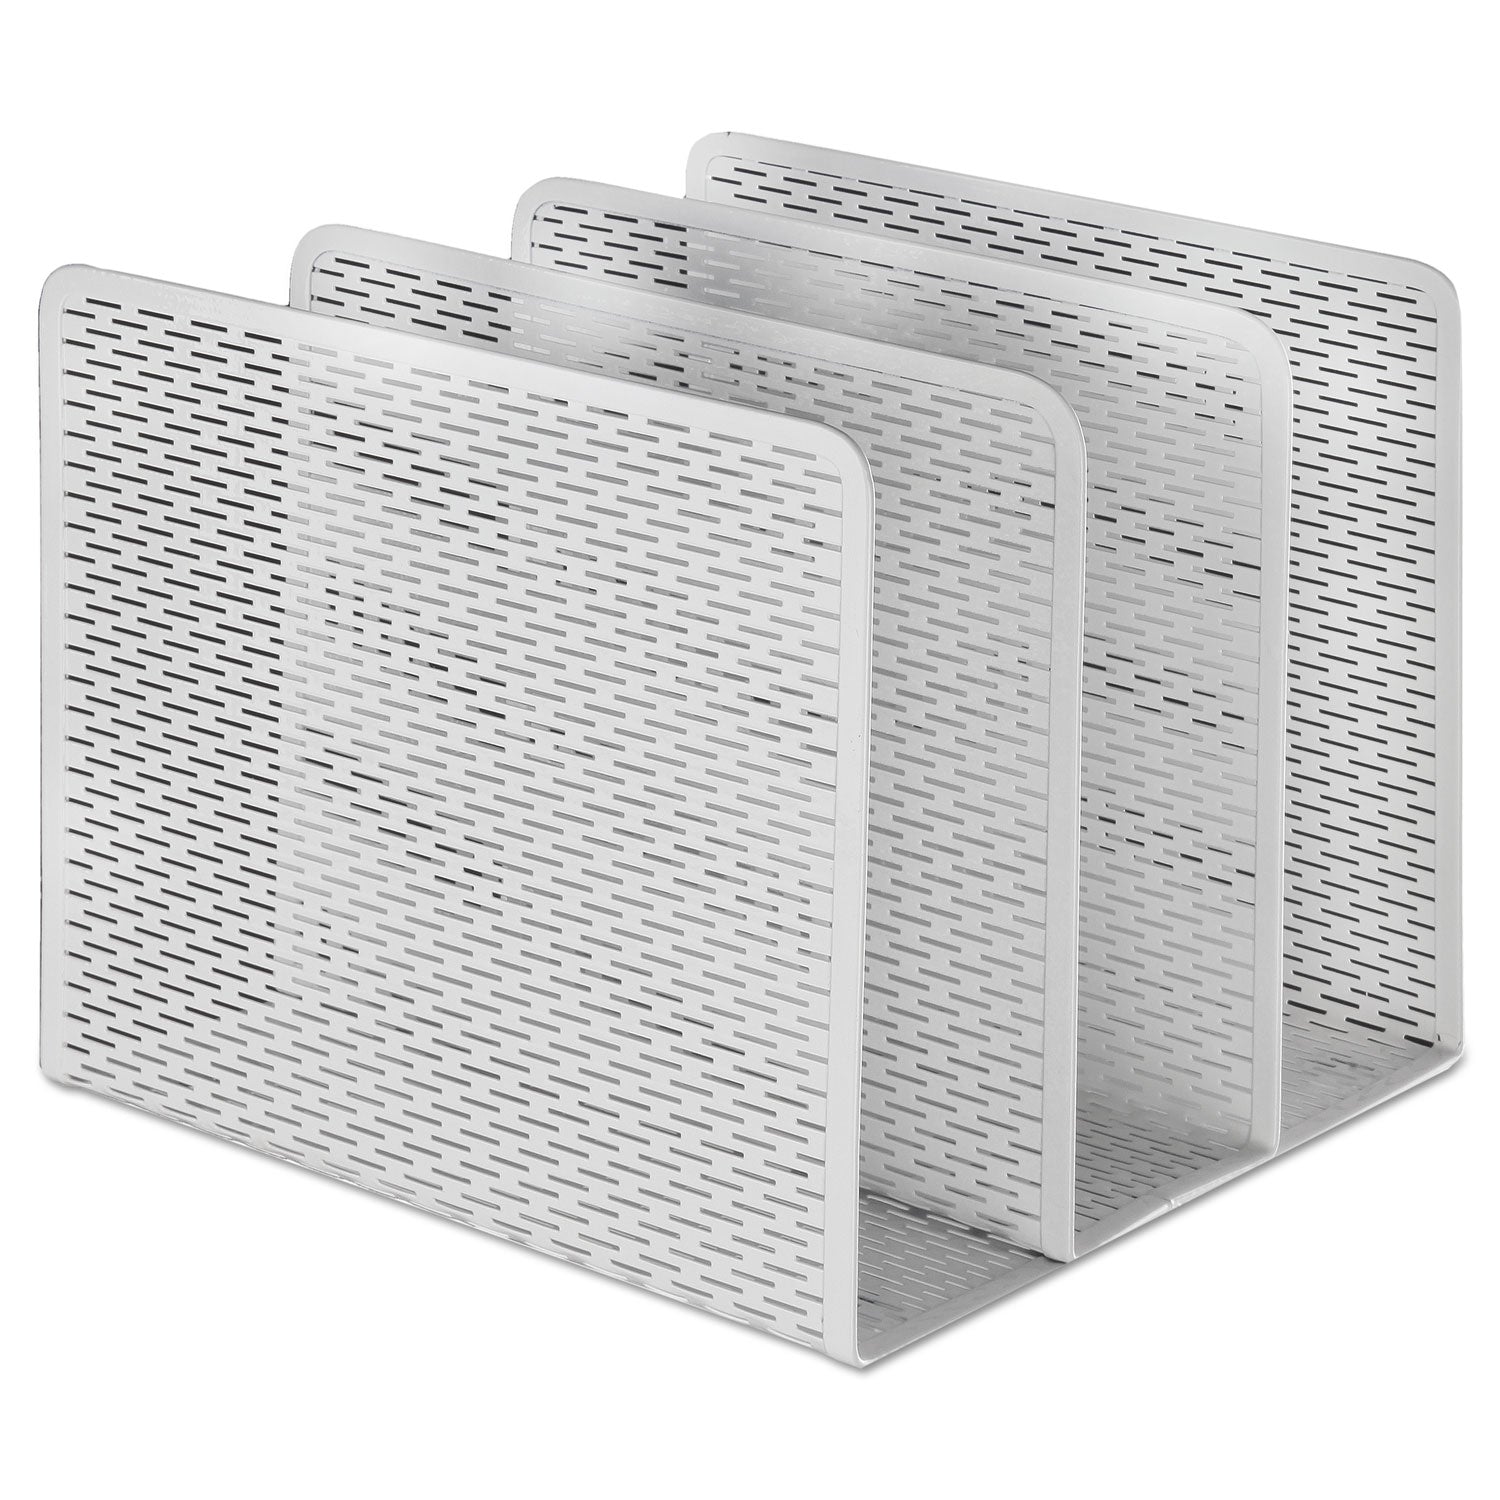 urban-collection-punched-metal-file-sorter-3-sections-letter-size-files-8-x-8-x-725-white_aopart20009wh - 1